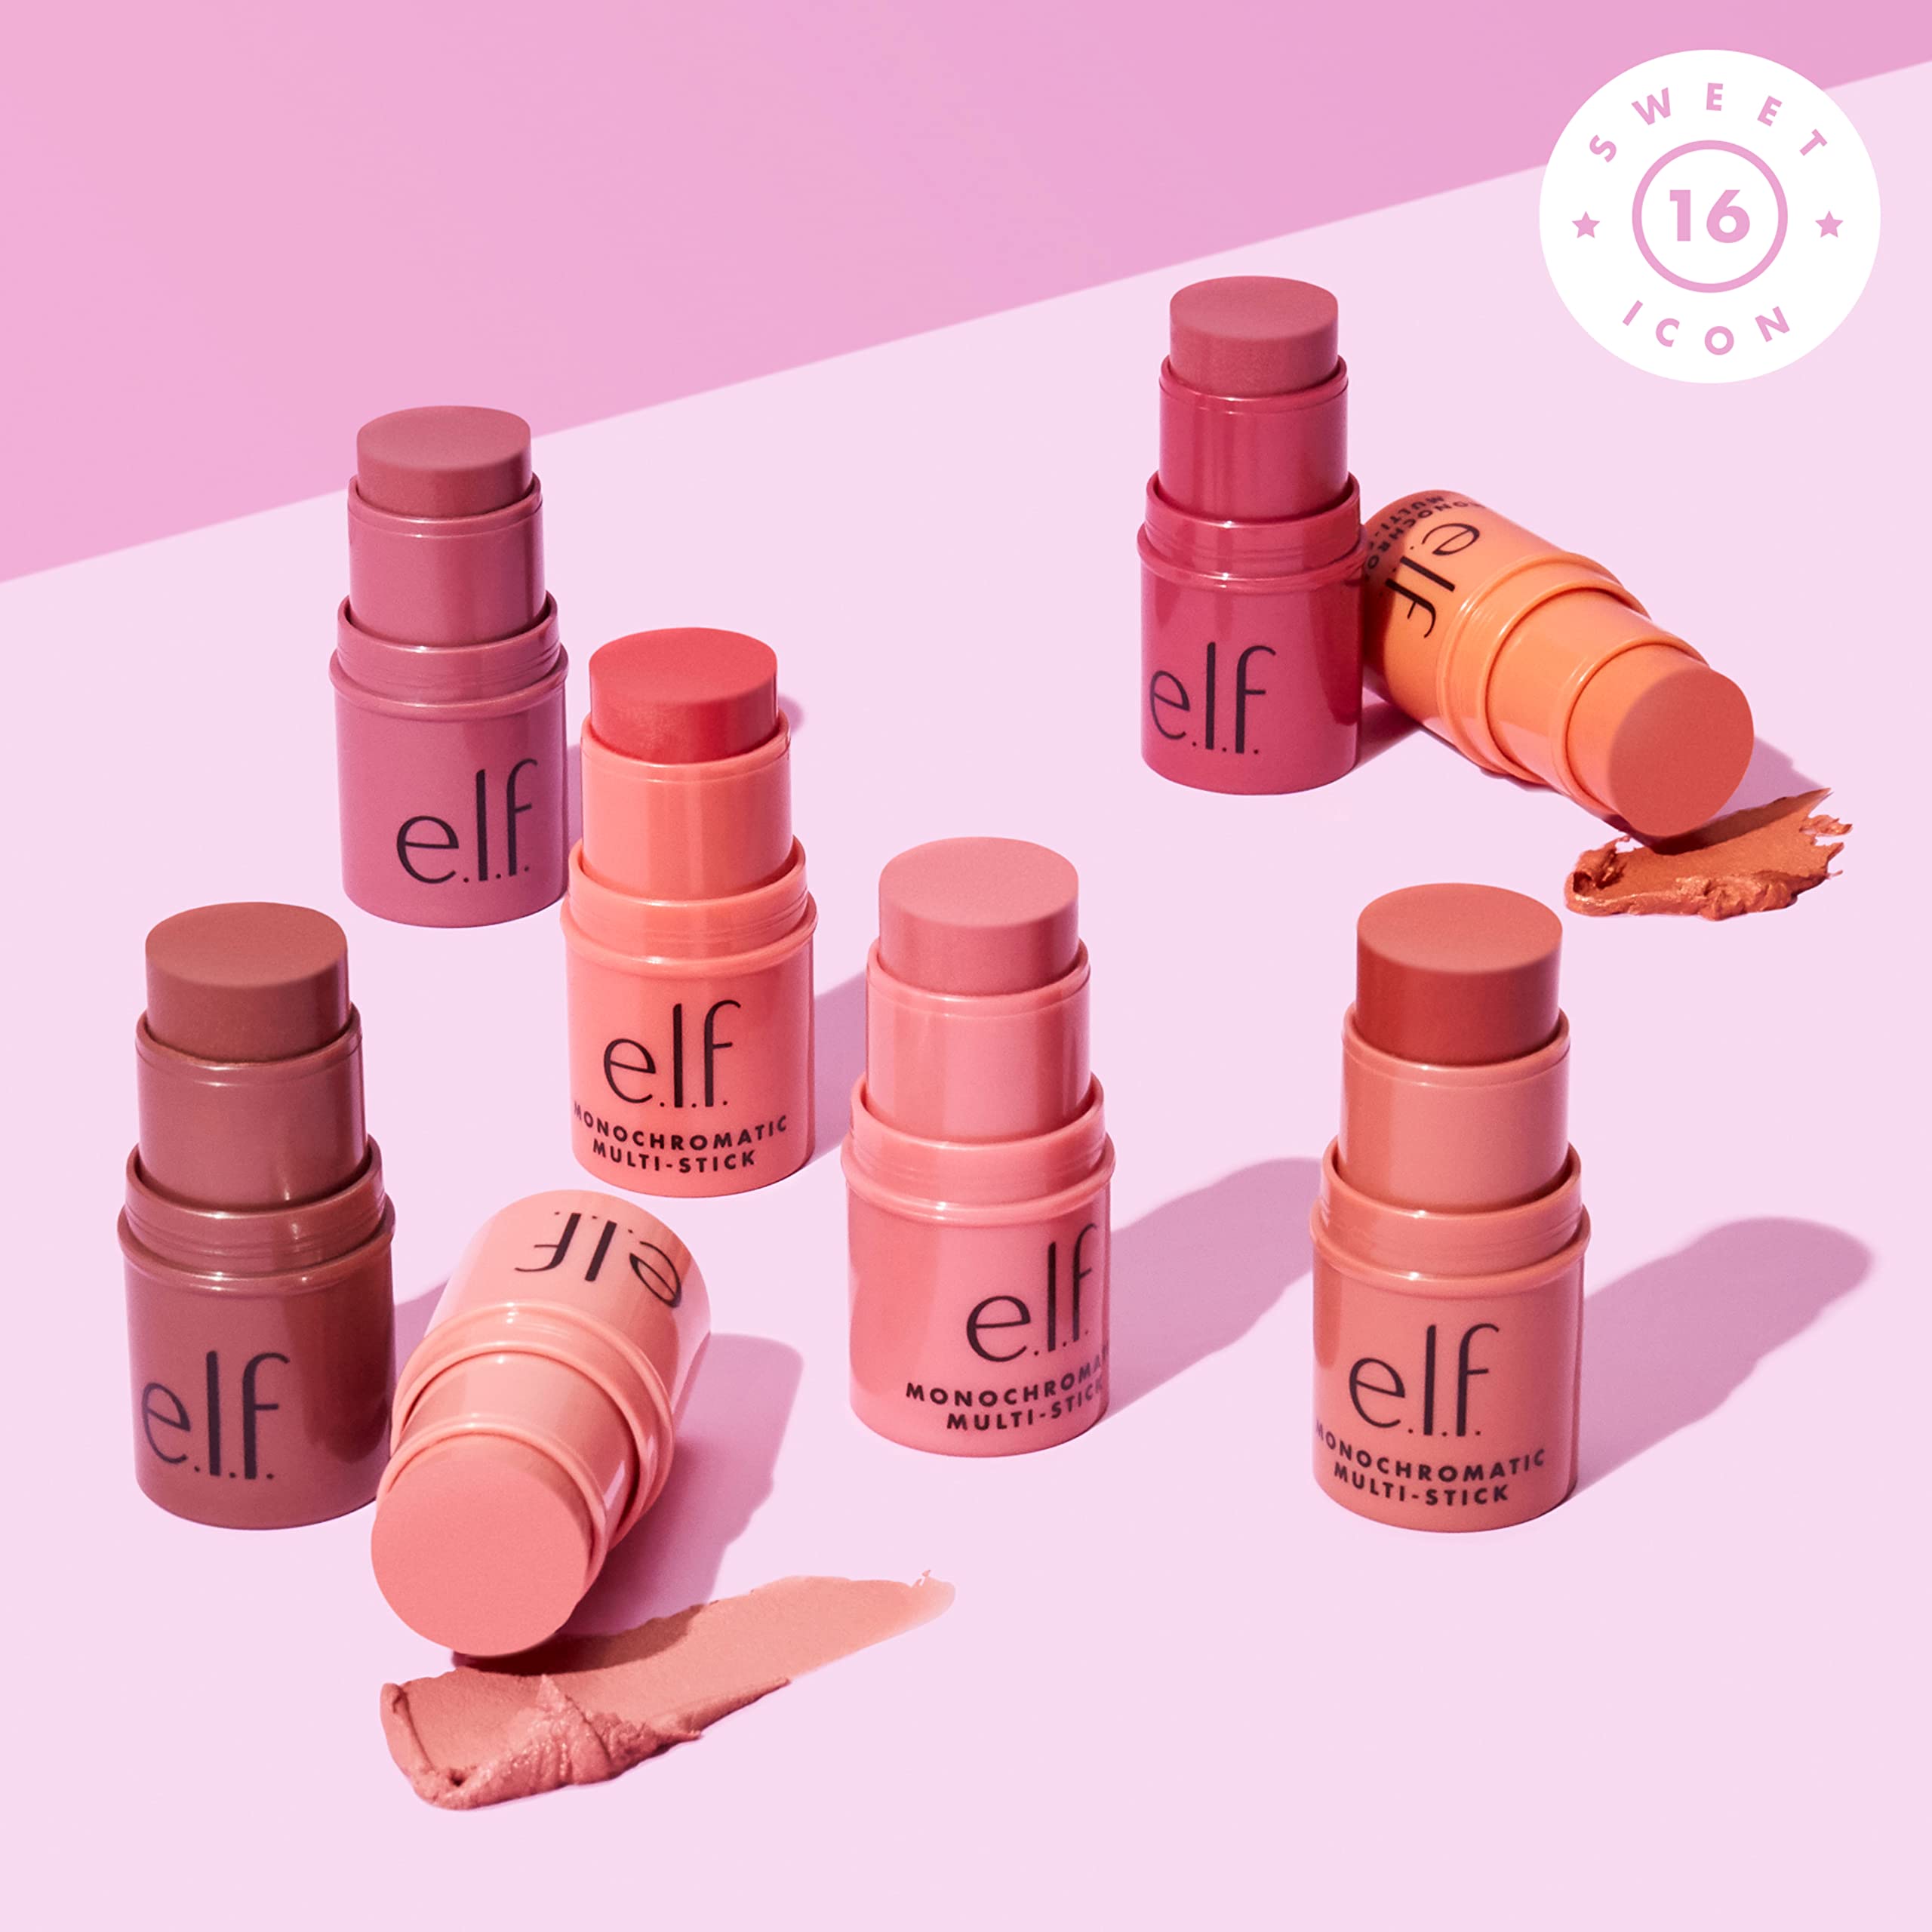 e.l.f. Monochromatic Multi Stick, Luxuriously Creamy & Blendable Color, For Eyes, Lips & Cheeks, Luminous Berry, 0.155 Oz (4.4g)